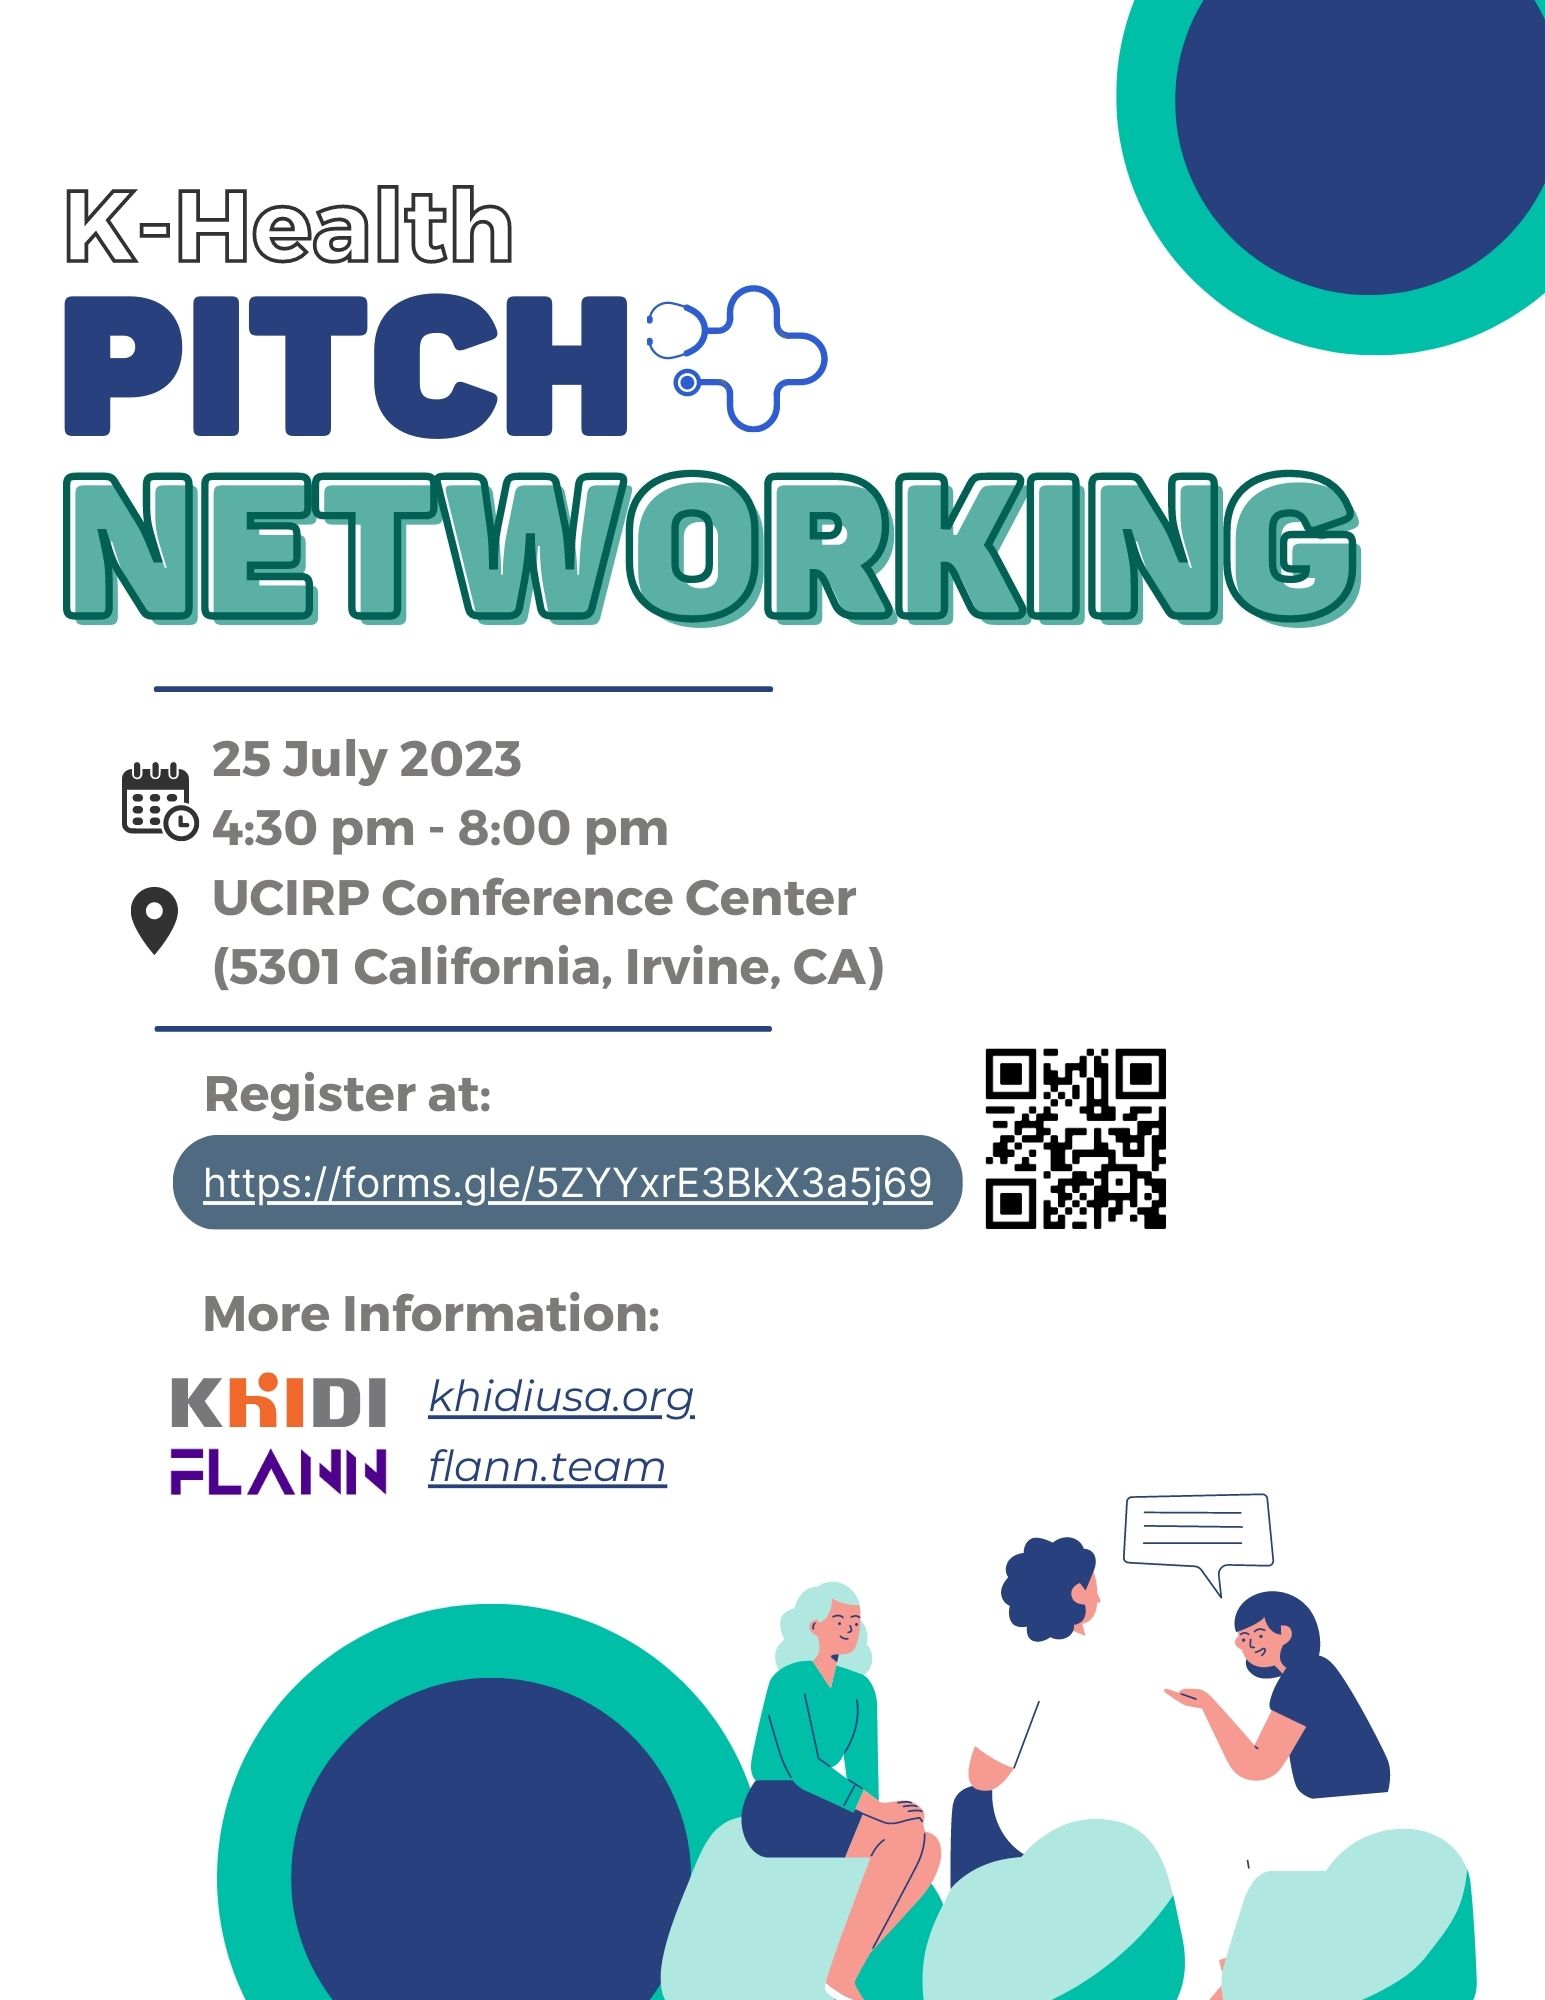 K-Health PITCH NETWORKING 25 July 2023 4:30pm-8:00pm UCIRP Conference Center(5301 California, Irvine, CA) Register at: https://forms.gle/5ZYYxrE3BkX3a5j69 More Information : khidiusa.org, flann.team